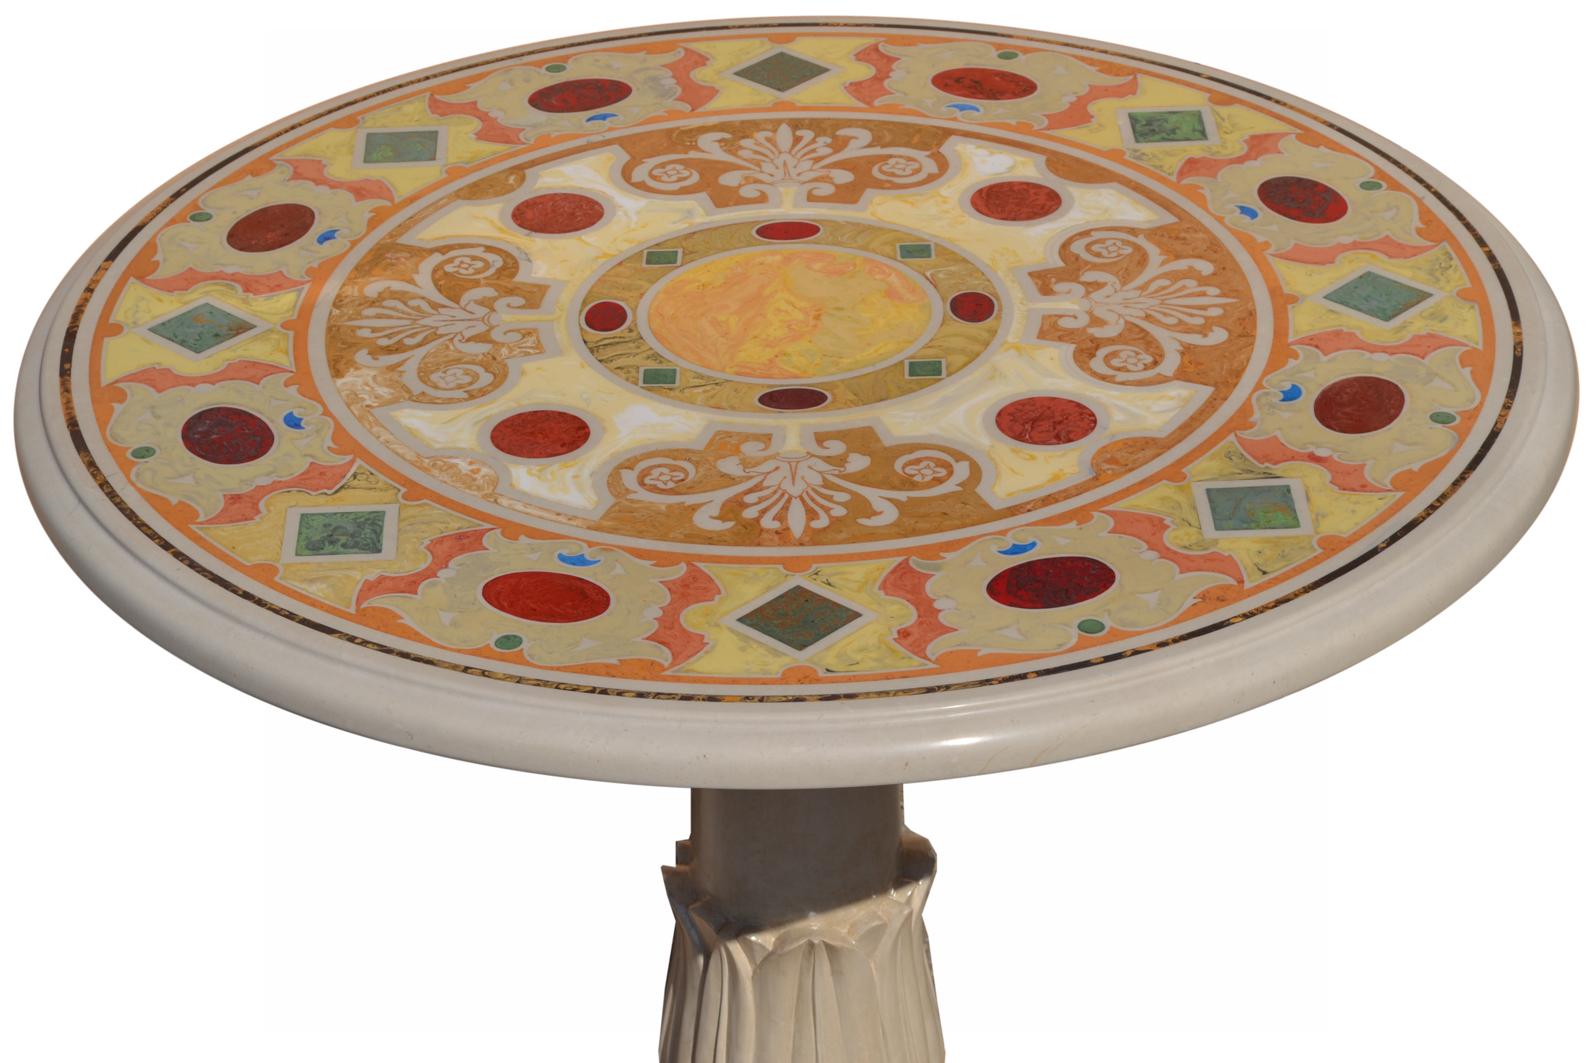 Cream marble round dining table or gueridon table
size: diam. 80 cm h. 74
 inches 31.50 h. 29.13
This table has been handcrafted by skilled artist using the old technique 
of the scagliola art inlay and takes inspiration from the classical paliotto